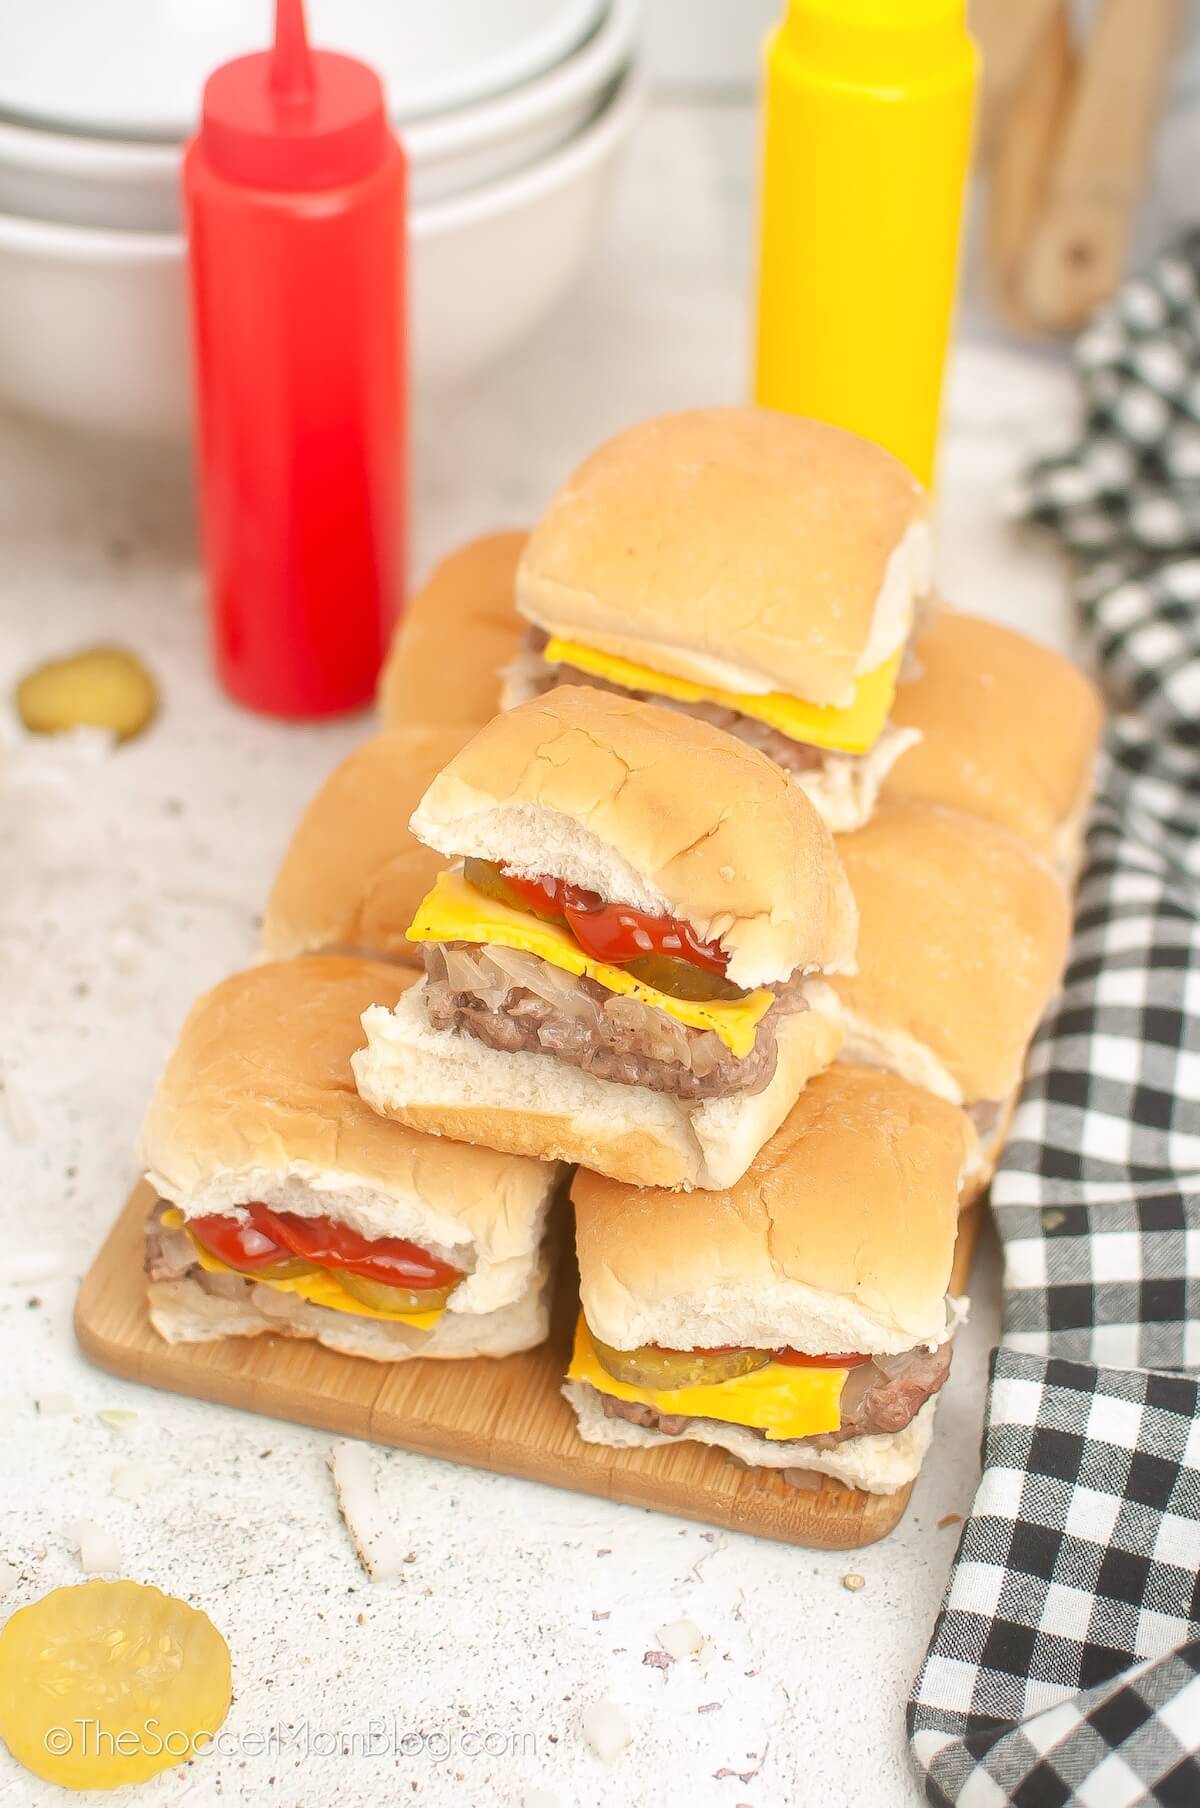 This Copycat White Castle Slider recipe recreates those iconic sliders with juicy steamed burgers, melty cheese, tangy pickles, and perfectly caramelized grilled onions.